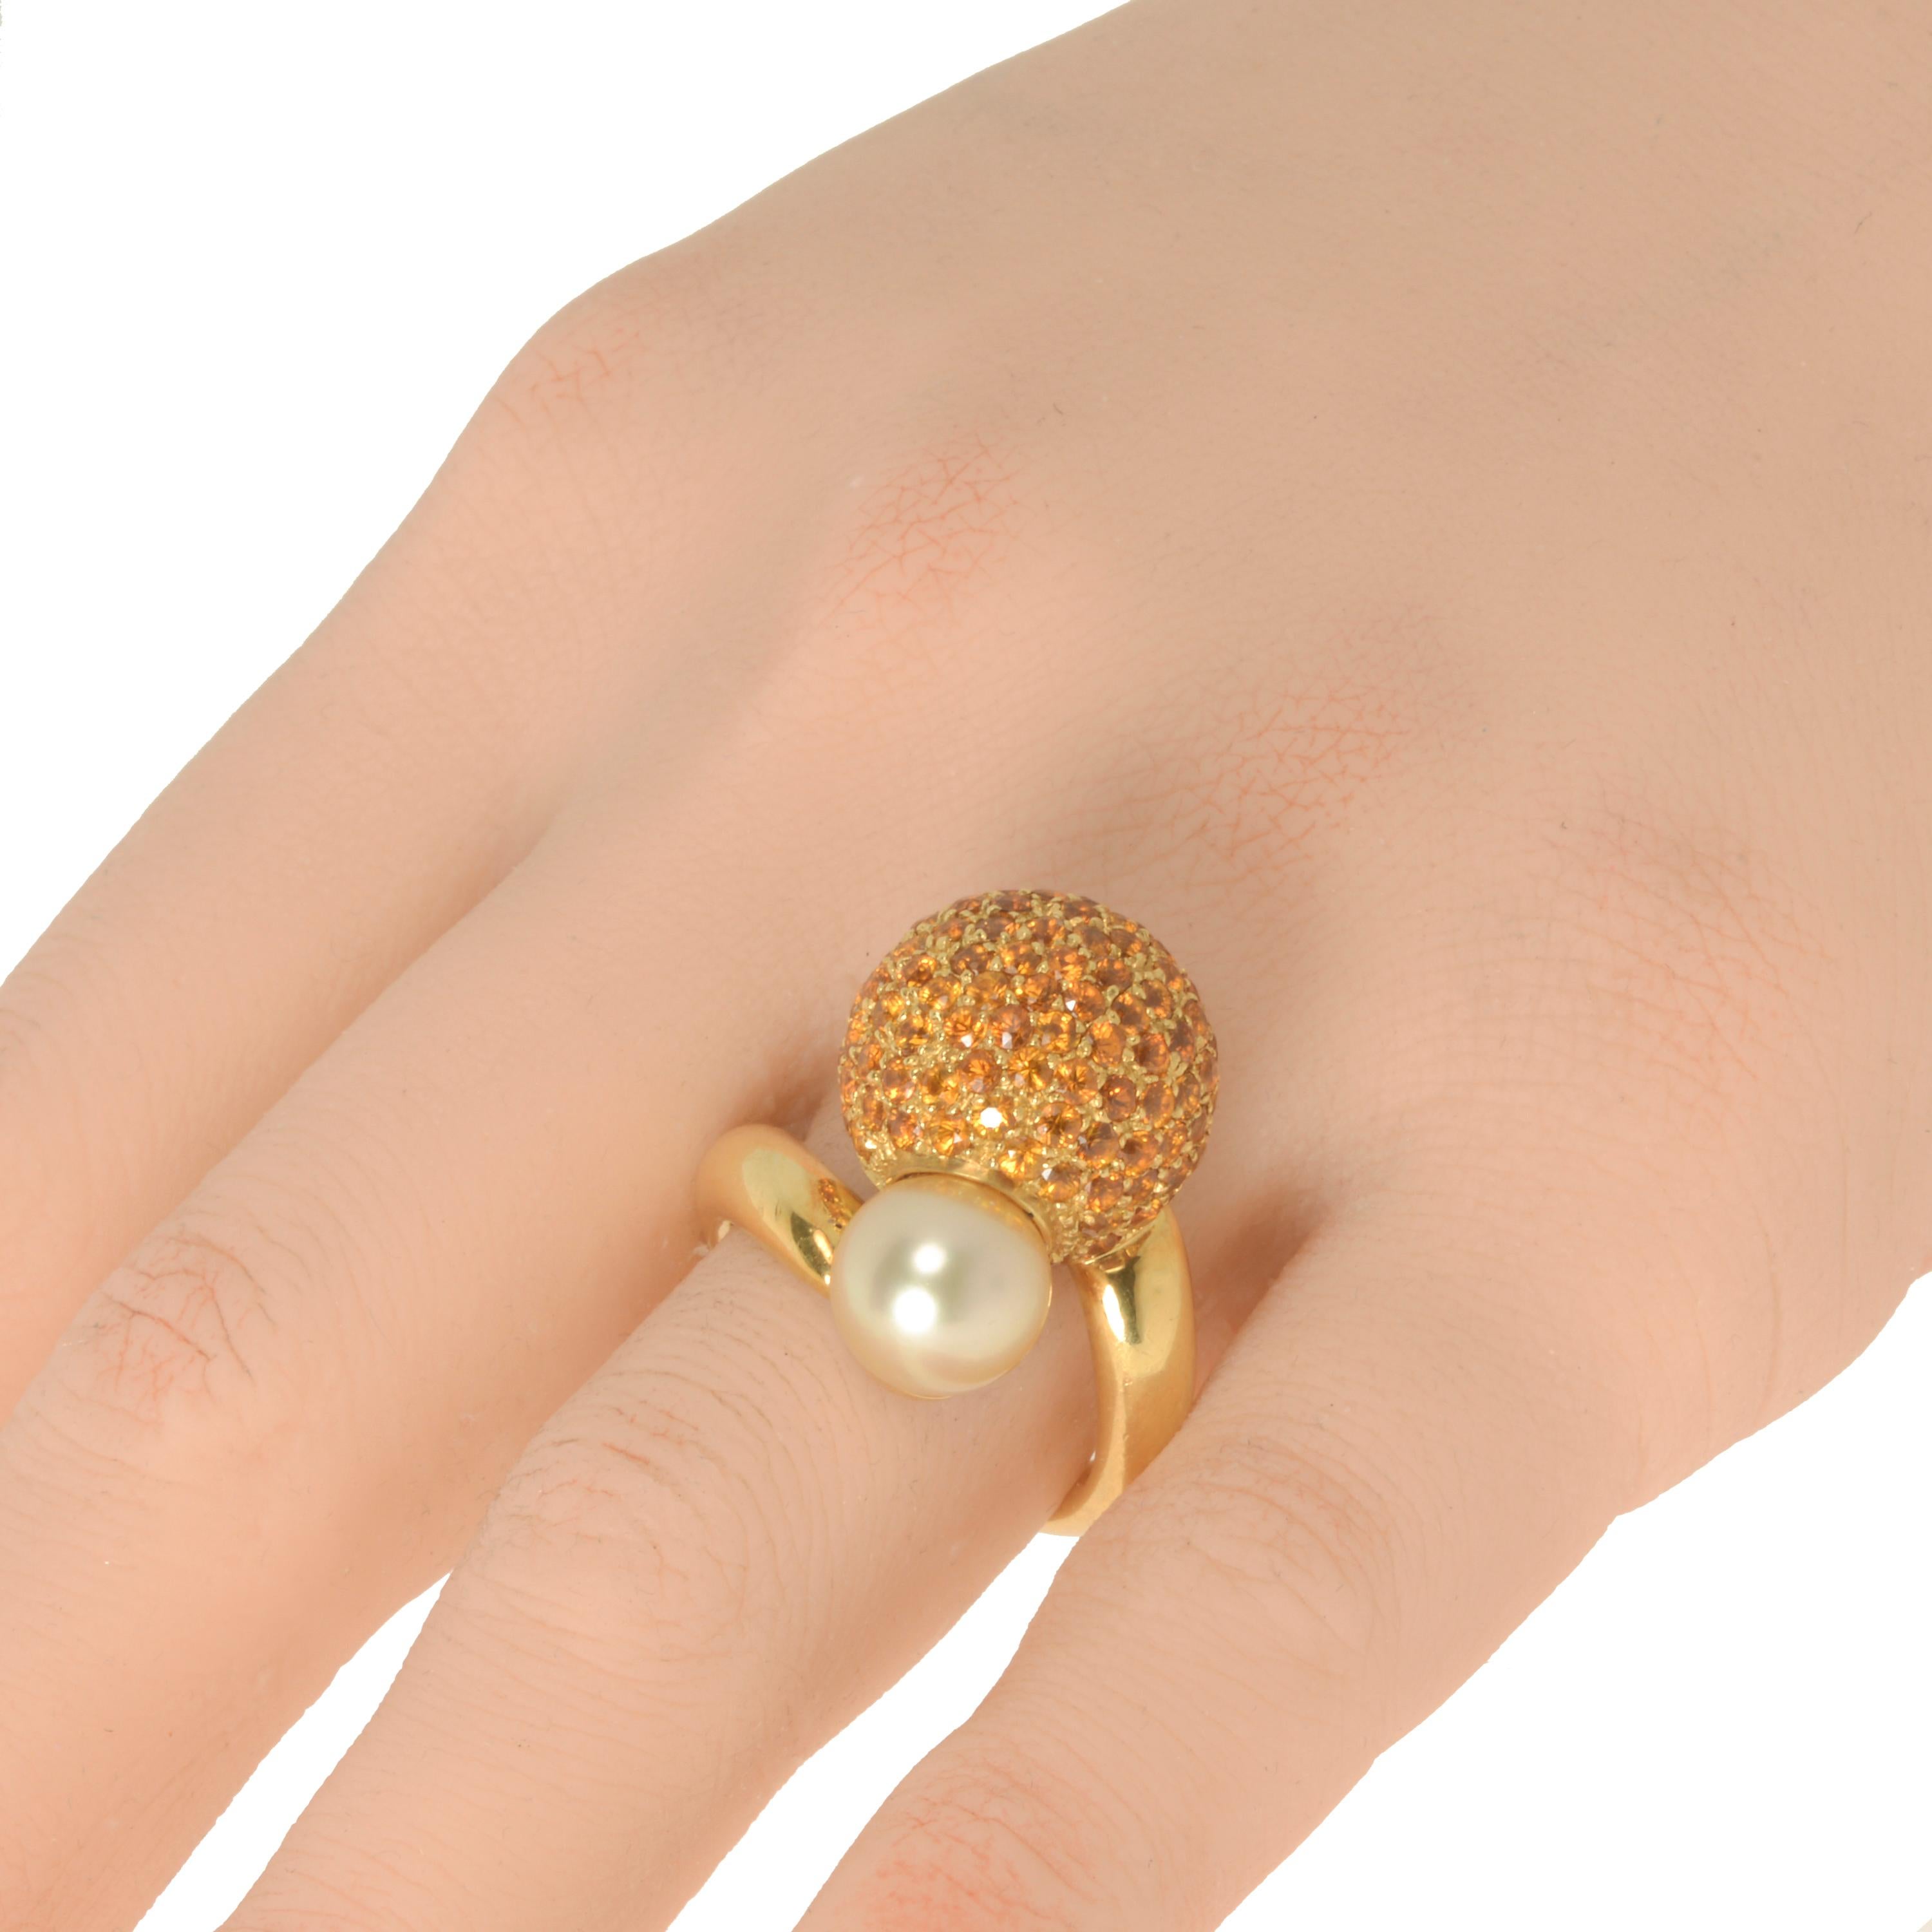 This striking Piero Milano 18K Yellow Gold Cocktail Ring features a shimmering sphere of yellow sapphire pave 5.02ct tw with a luminous 1.2g pearl at each end of a polished white gold ring that wraps around your finger. The ring size is 8.25. The